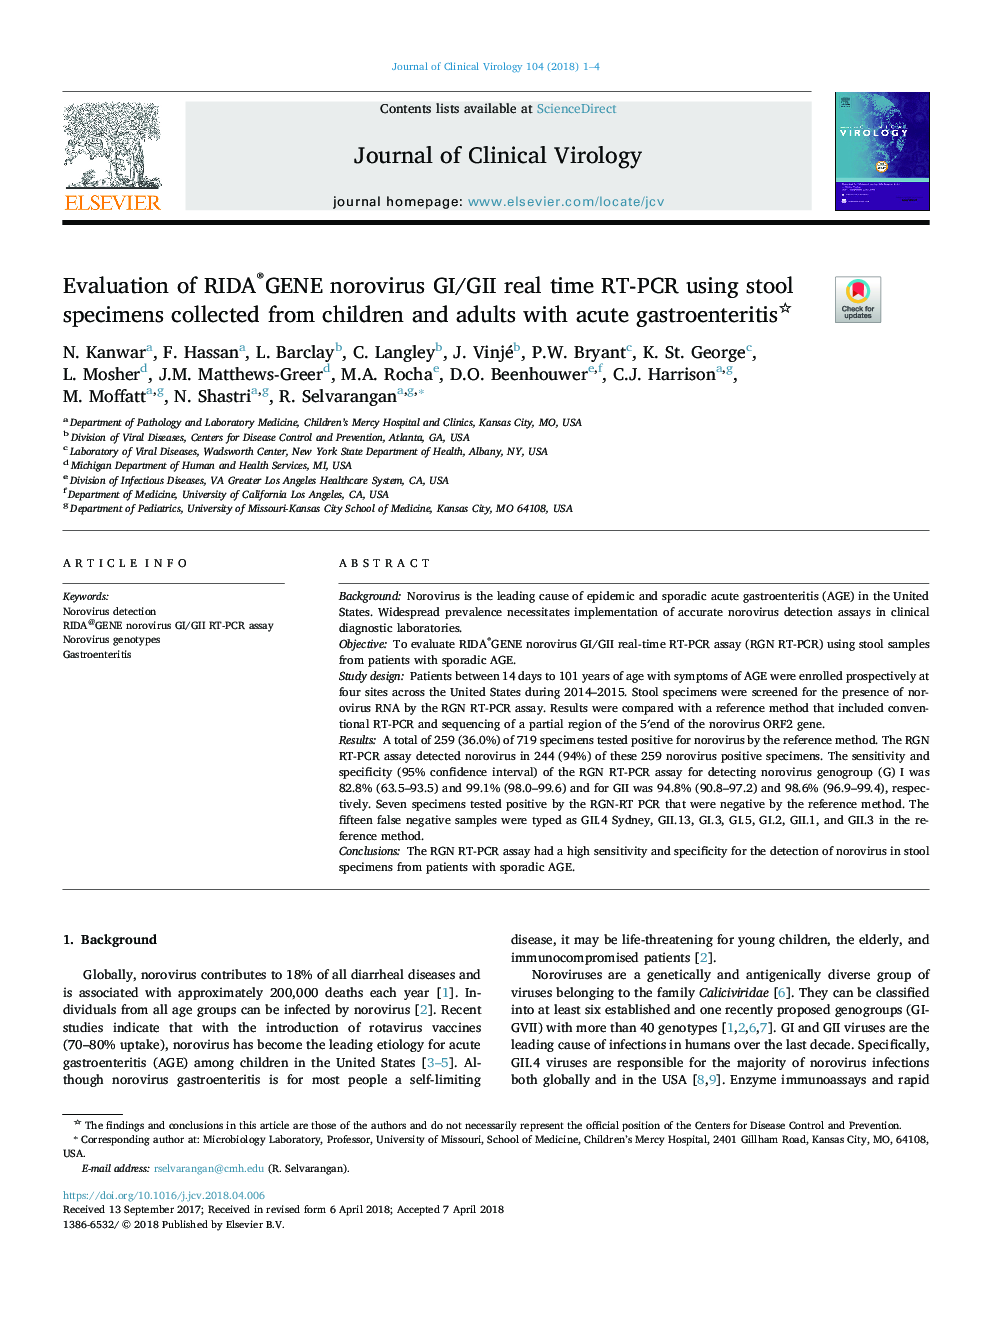 Evaluation of RIDA®GENE norovirus GI/GII real time RT-PCR using stool specimens collected from children and adults with acute gastroenteritis